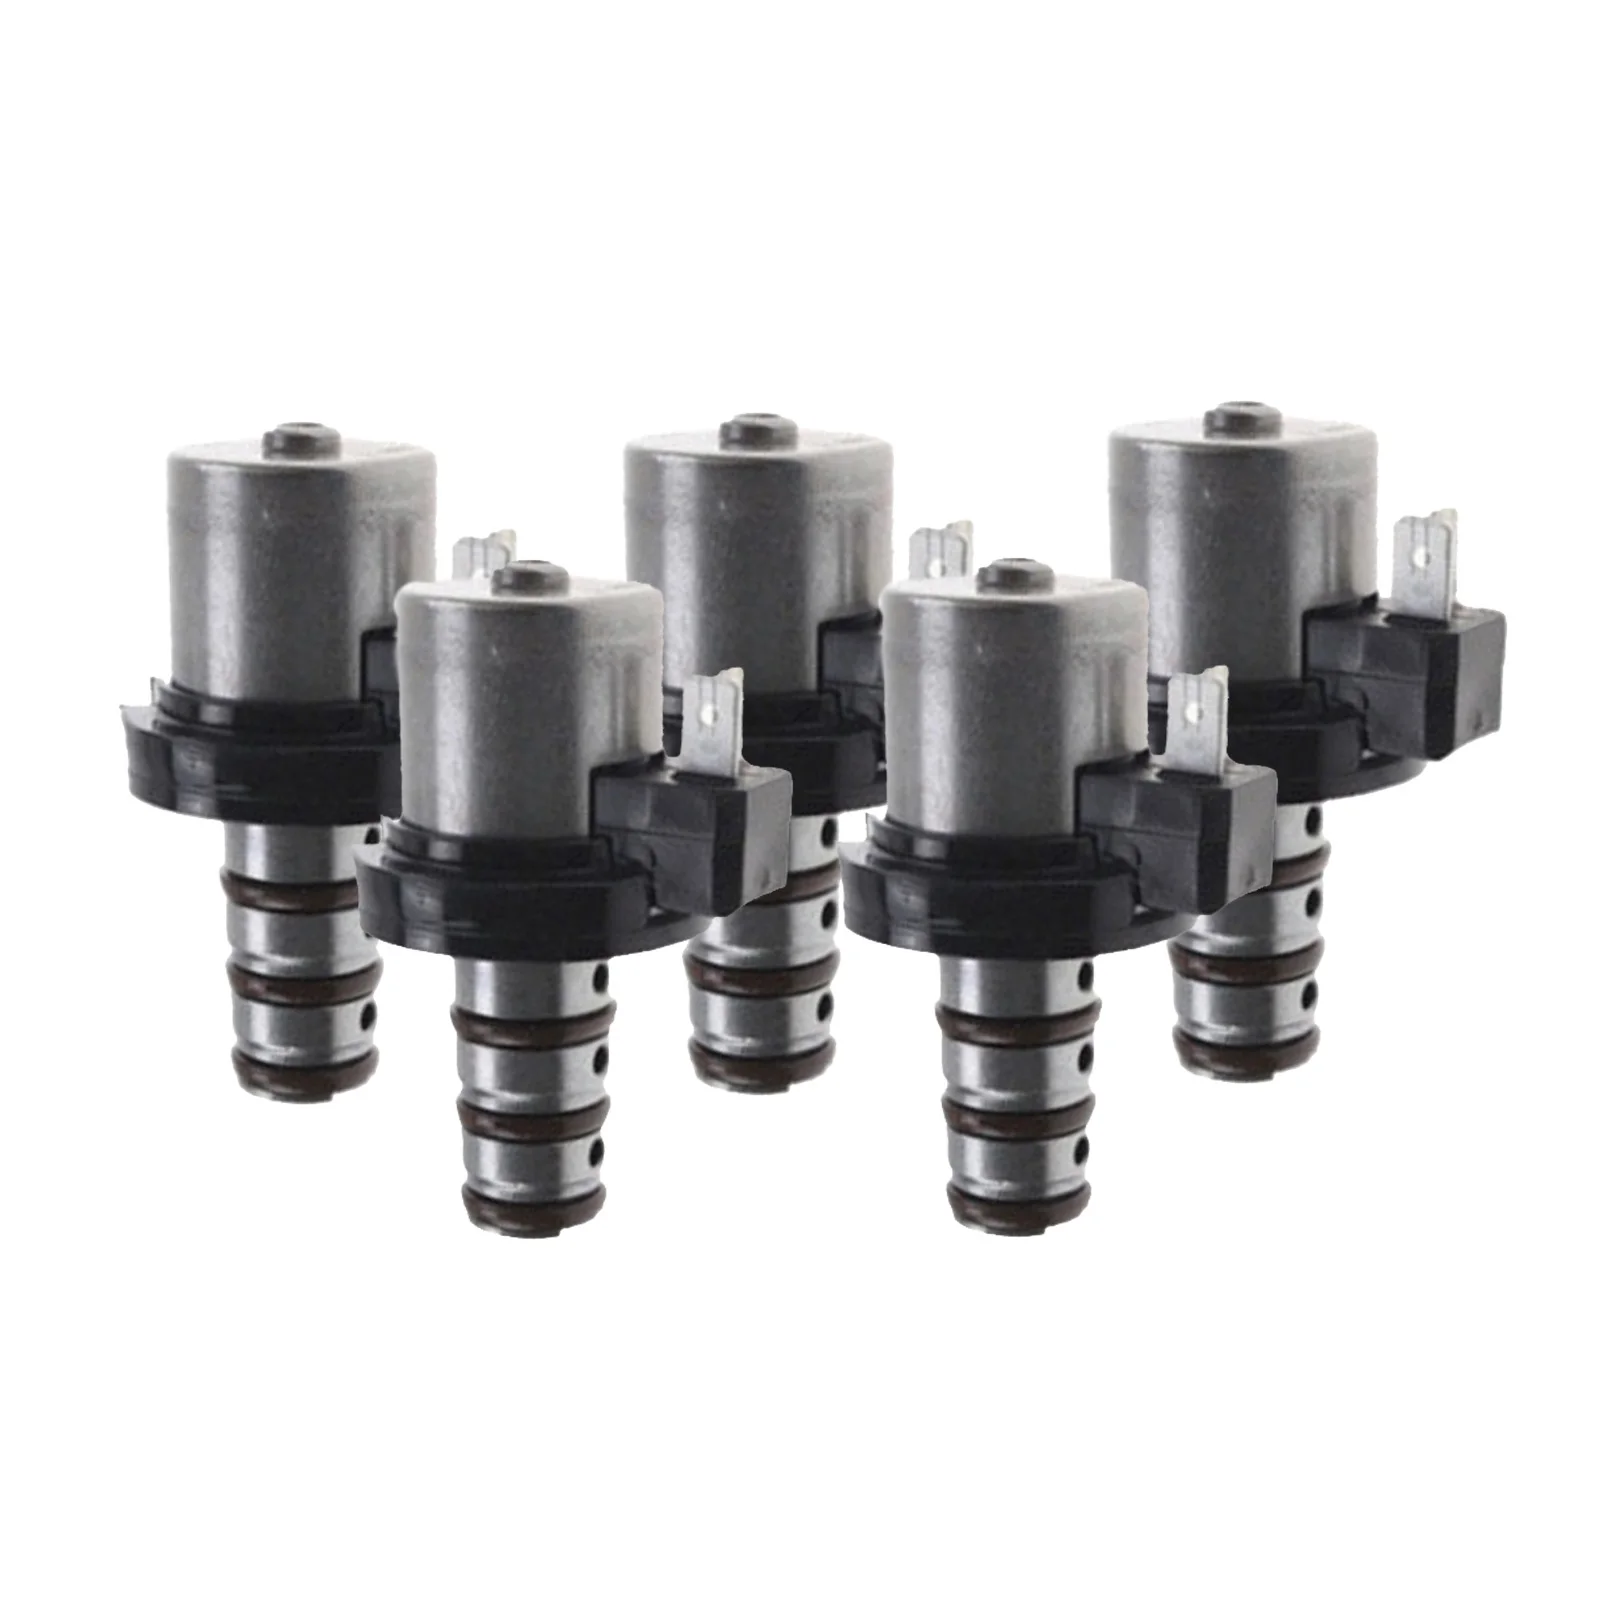 5-Pack Transmission Solenoid Valve Set F4A51 MD758981 V4A51 F4A41 Replacement Fit for Hyundai for Chrysler for 